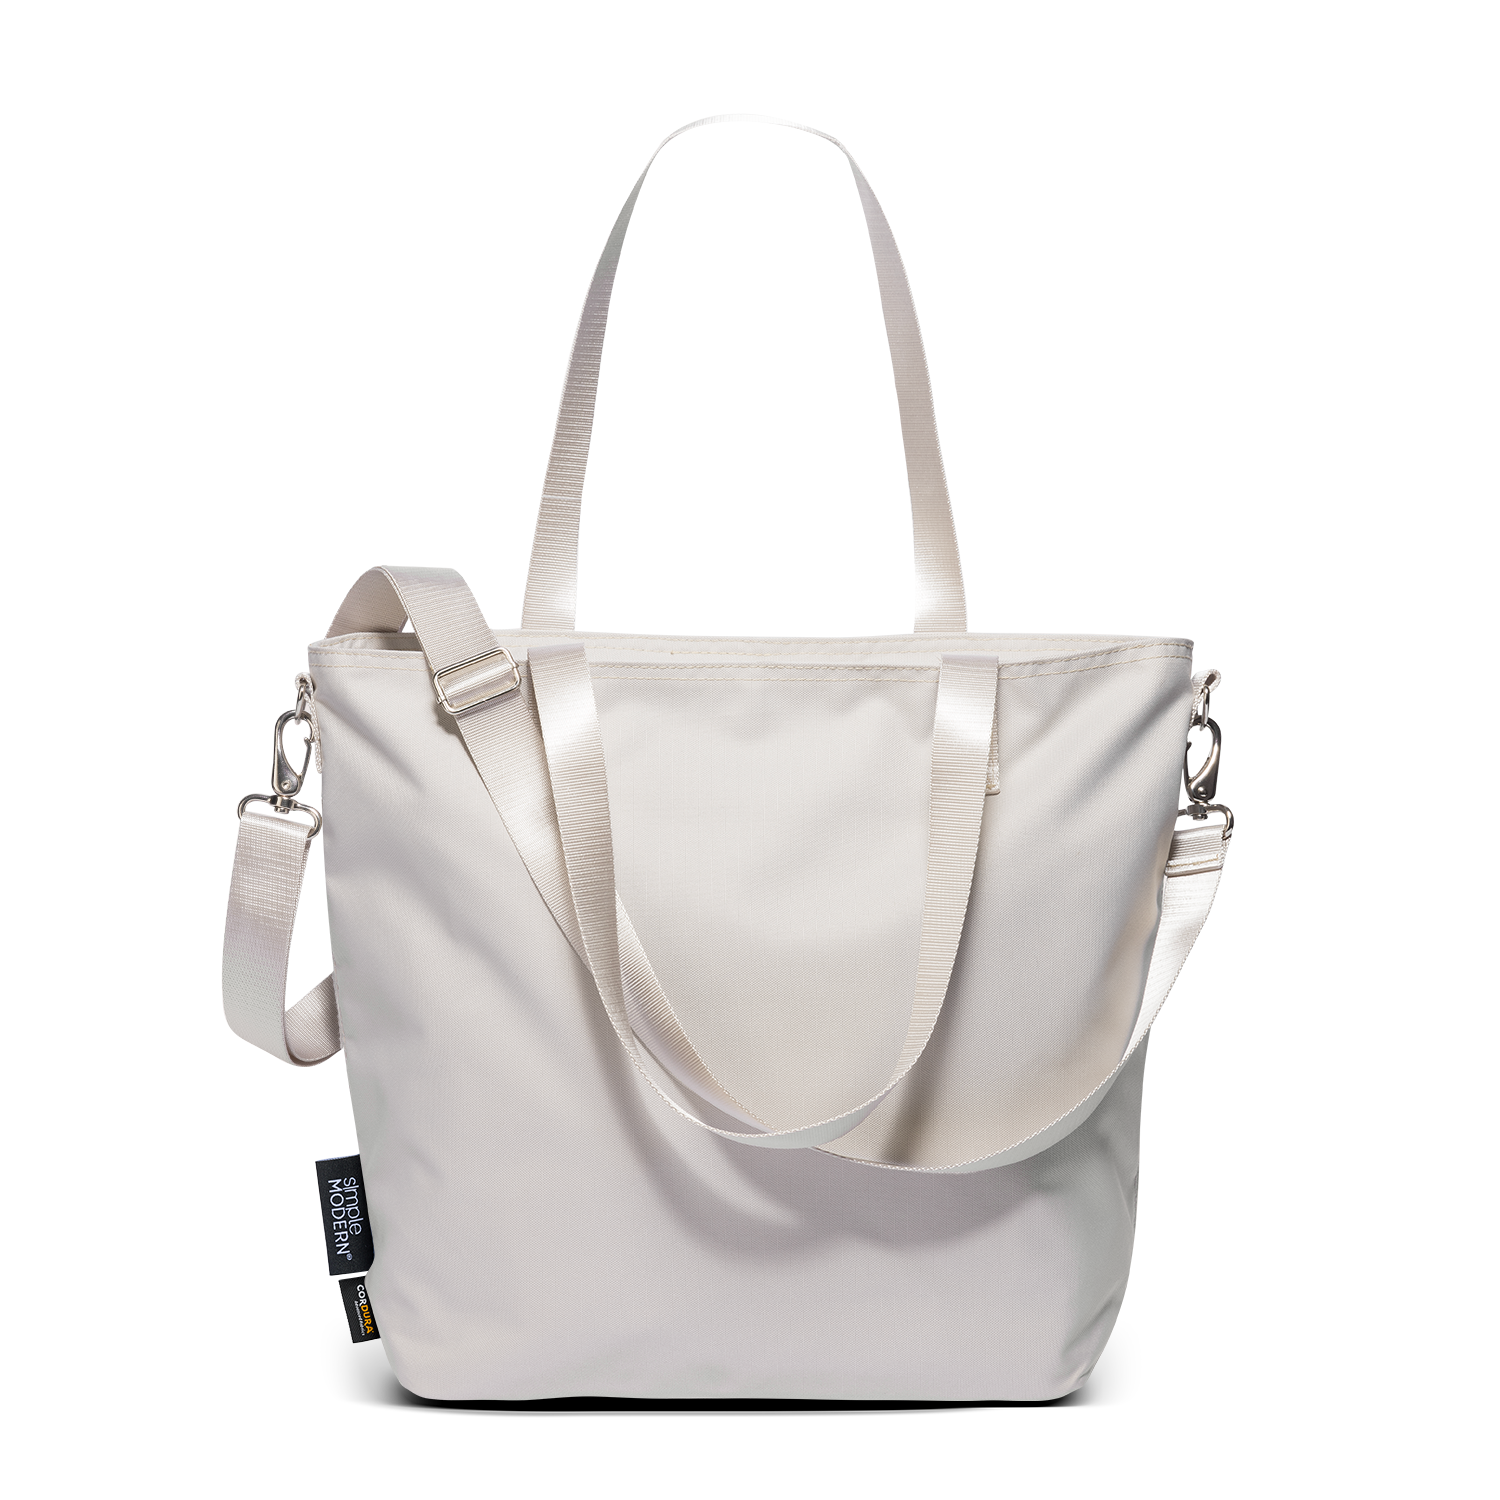 Simple Modern on Instagram: The Harper Tote - designed to carry all your  must-haves conveniently and securely, plus plenty more!